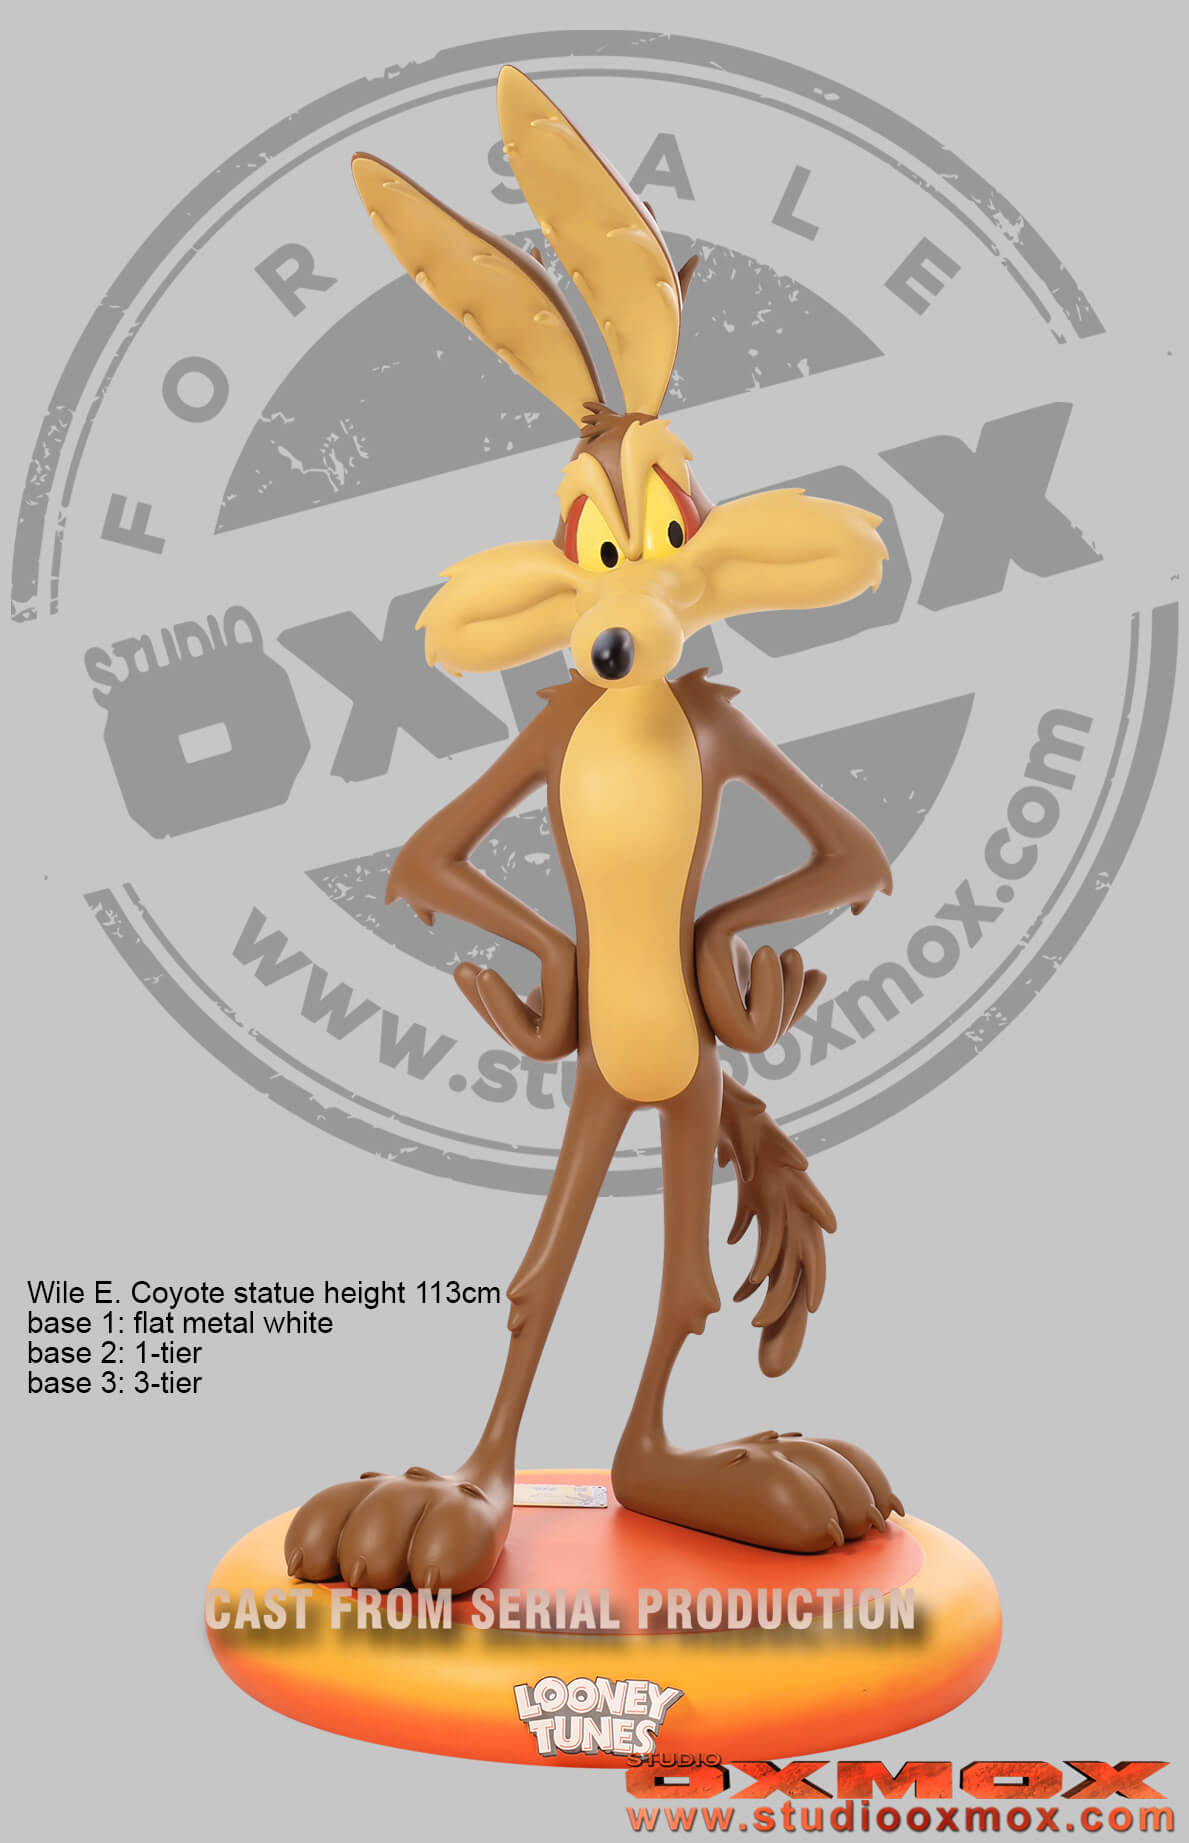 Looney Tunes statues, Wile E. Coyote life size